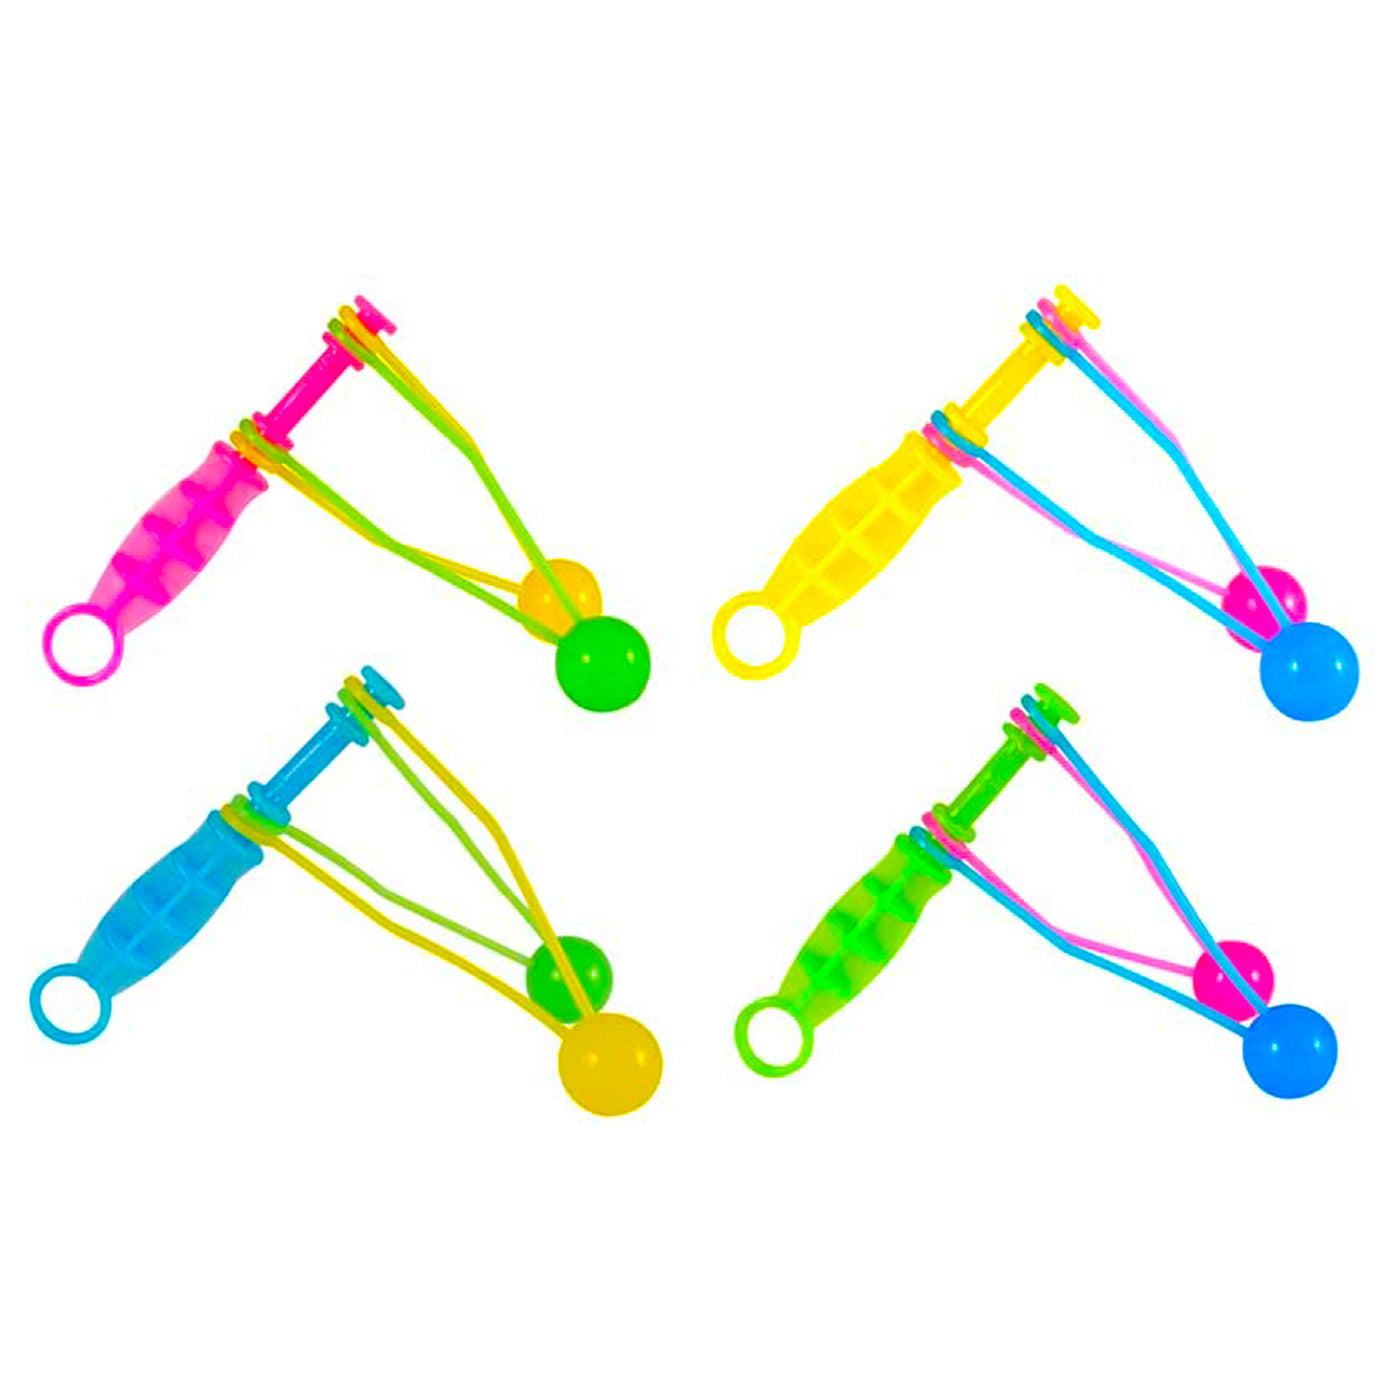 Neon Birthday Party Favours For Boys And Girls With Neon Toys And Candy.